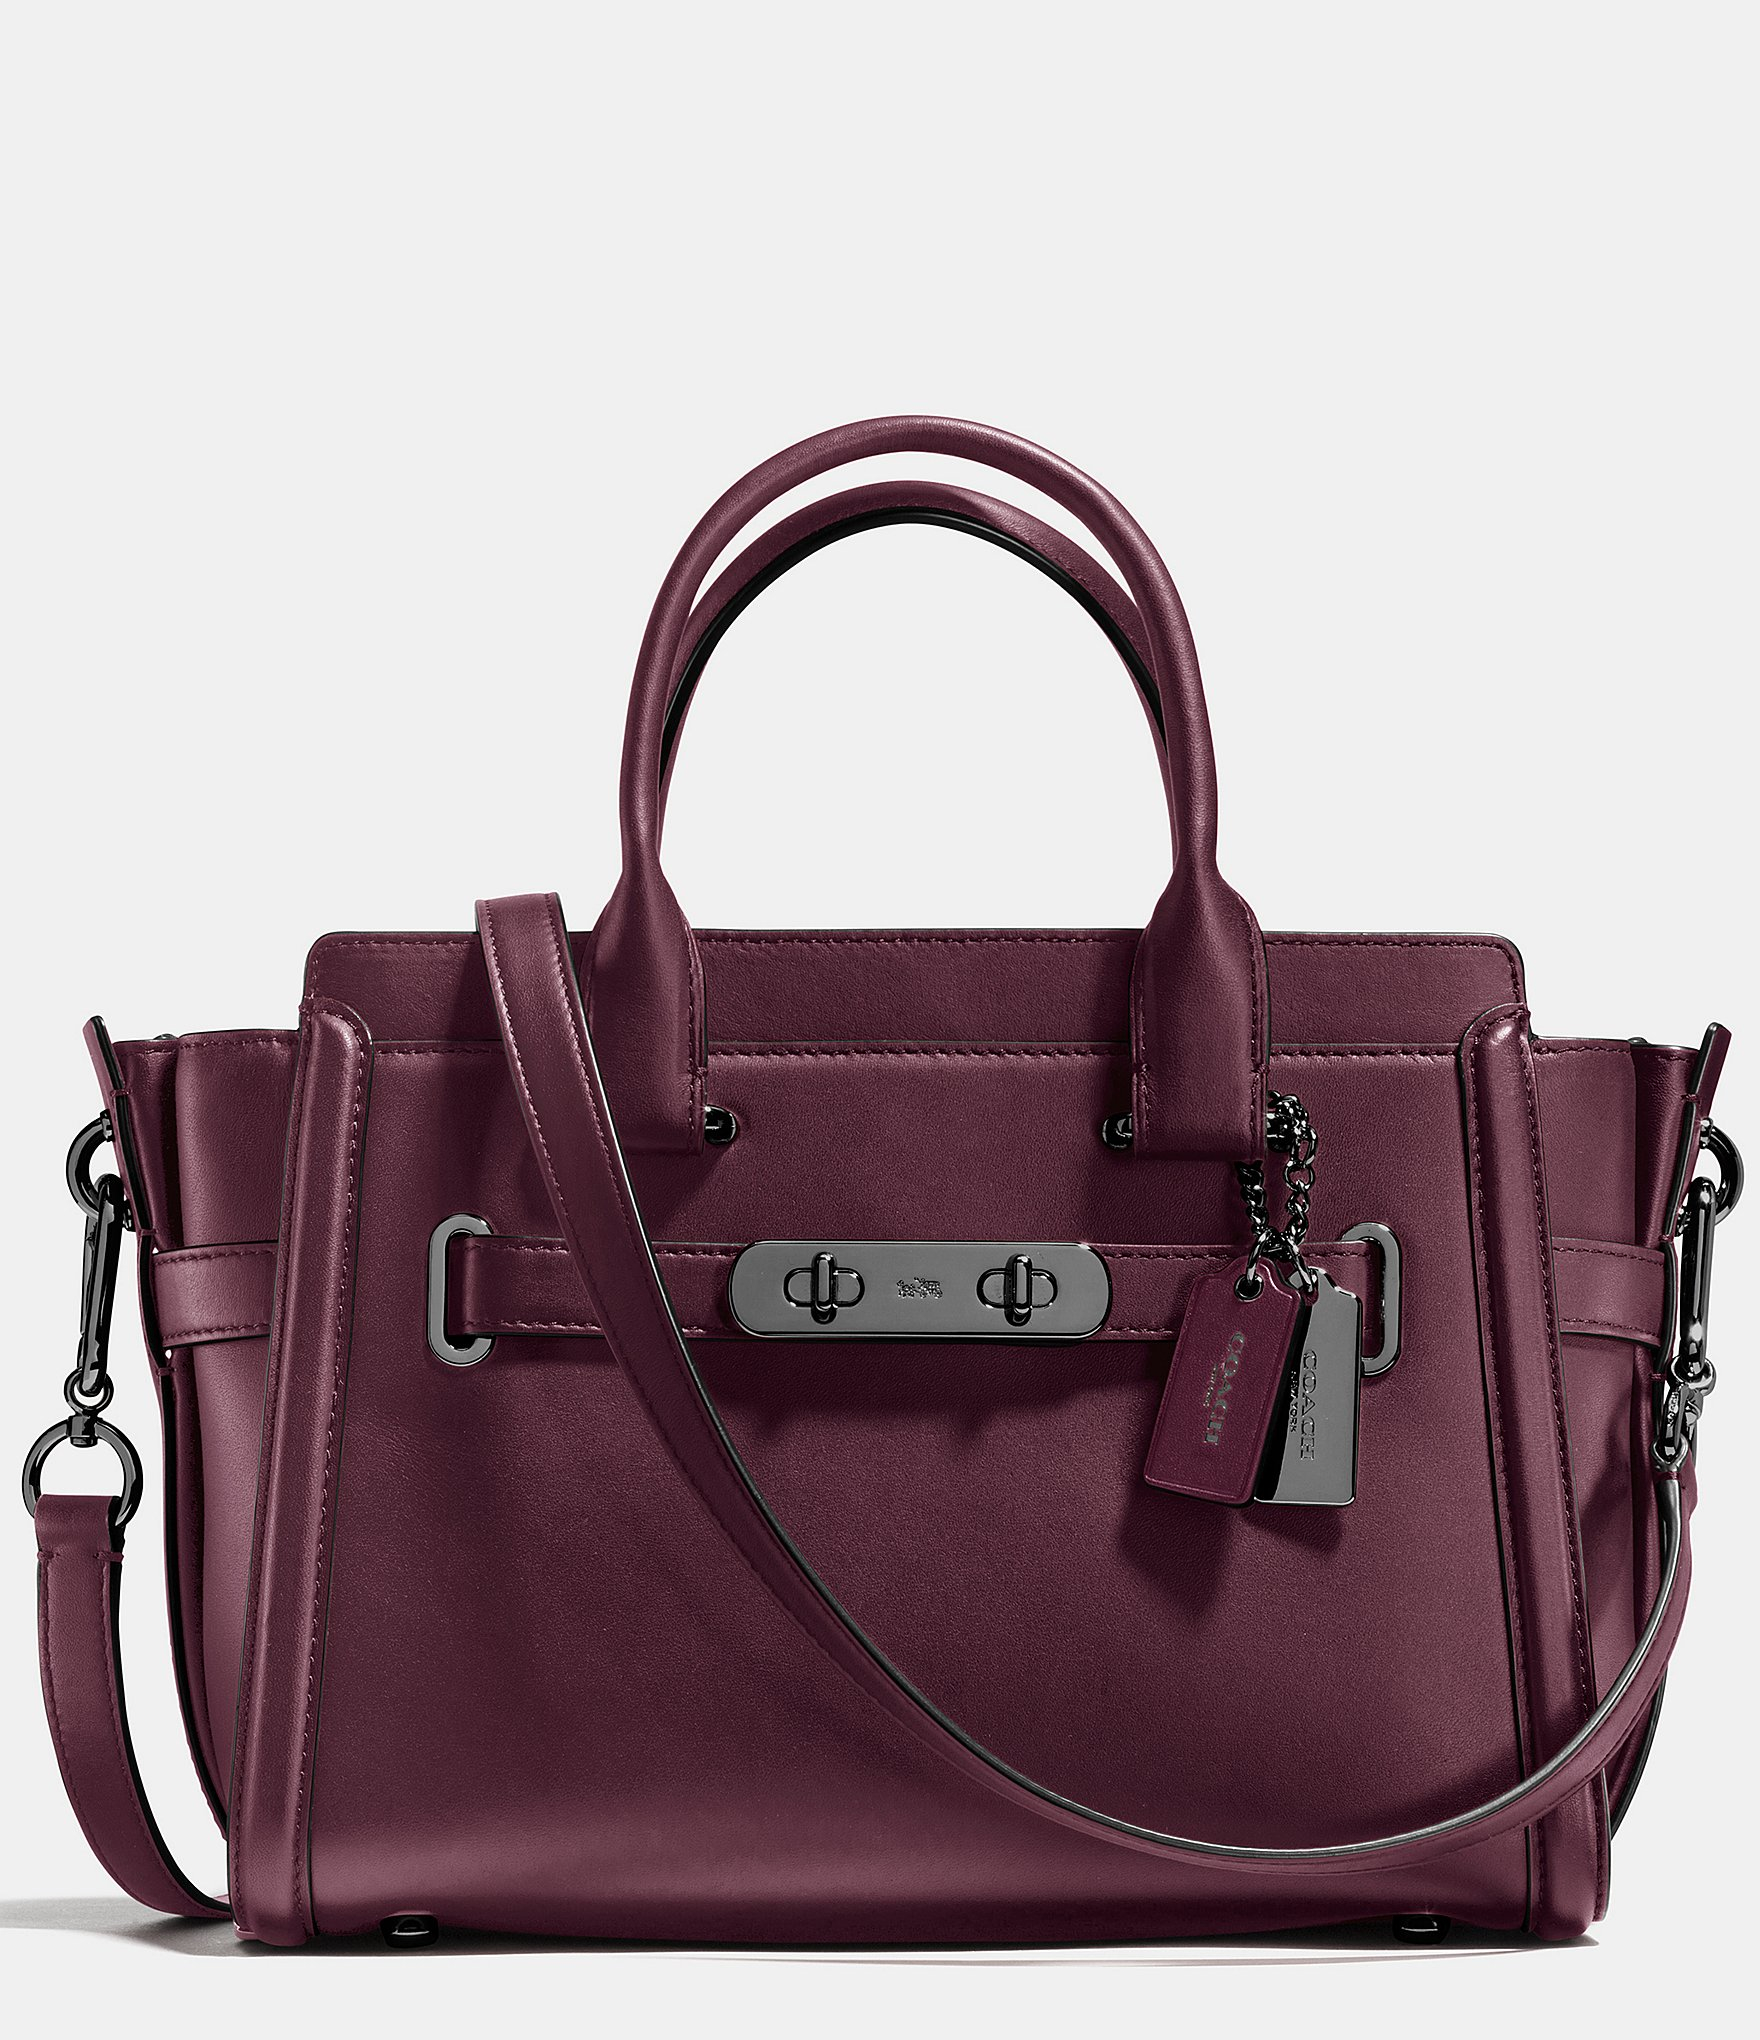 Lyst - Coach Swagger 27 In Glovetanned Leather in Purple